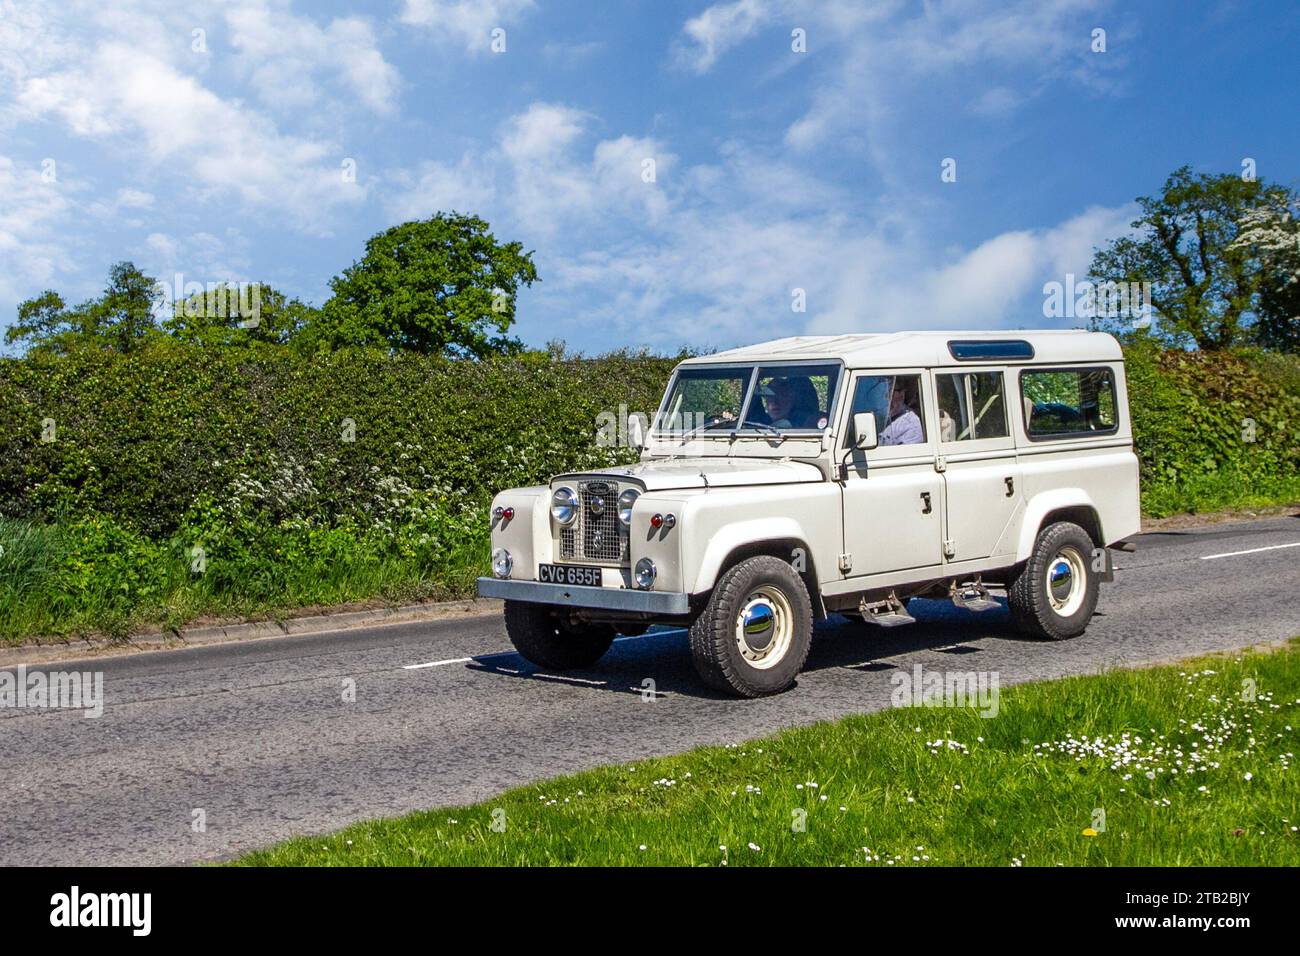 1968 60s sixties Cream HCV Land Rover 3300 cc Diesel LWB 110 hard top Series IIA ; Vintage, restored classic motors, automobile collectors motoring enthusiasts, historic veteran cars travelling in Cheshire, UK Stock Photo